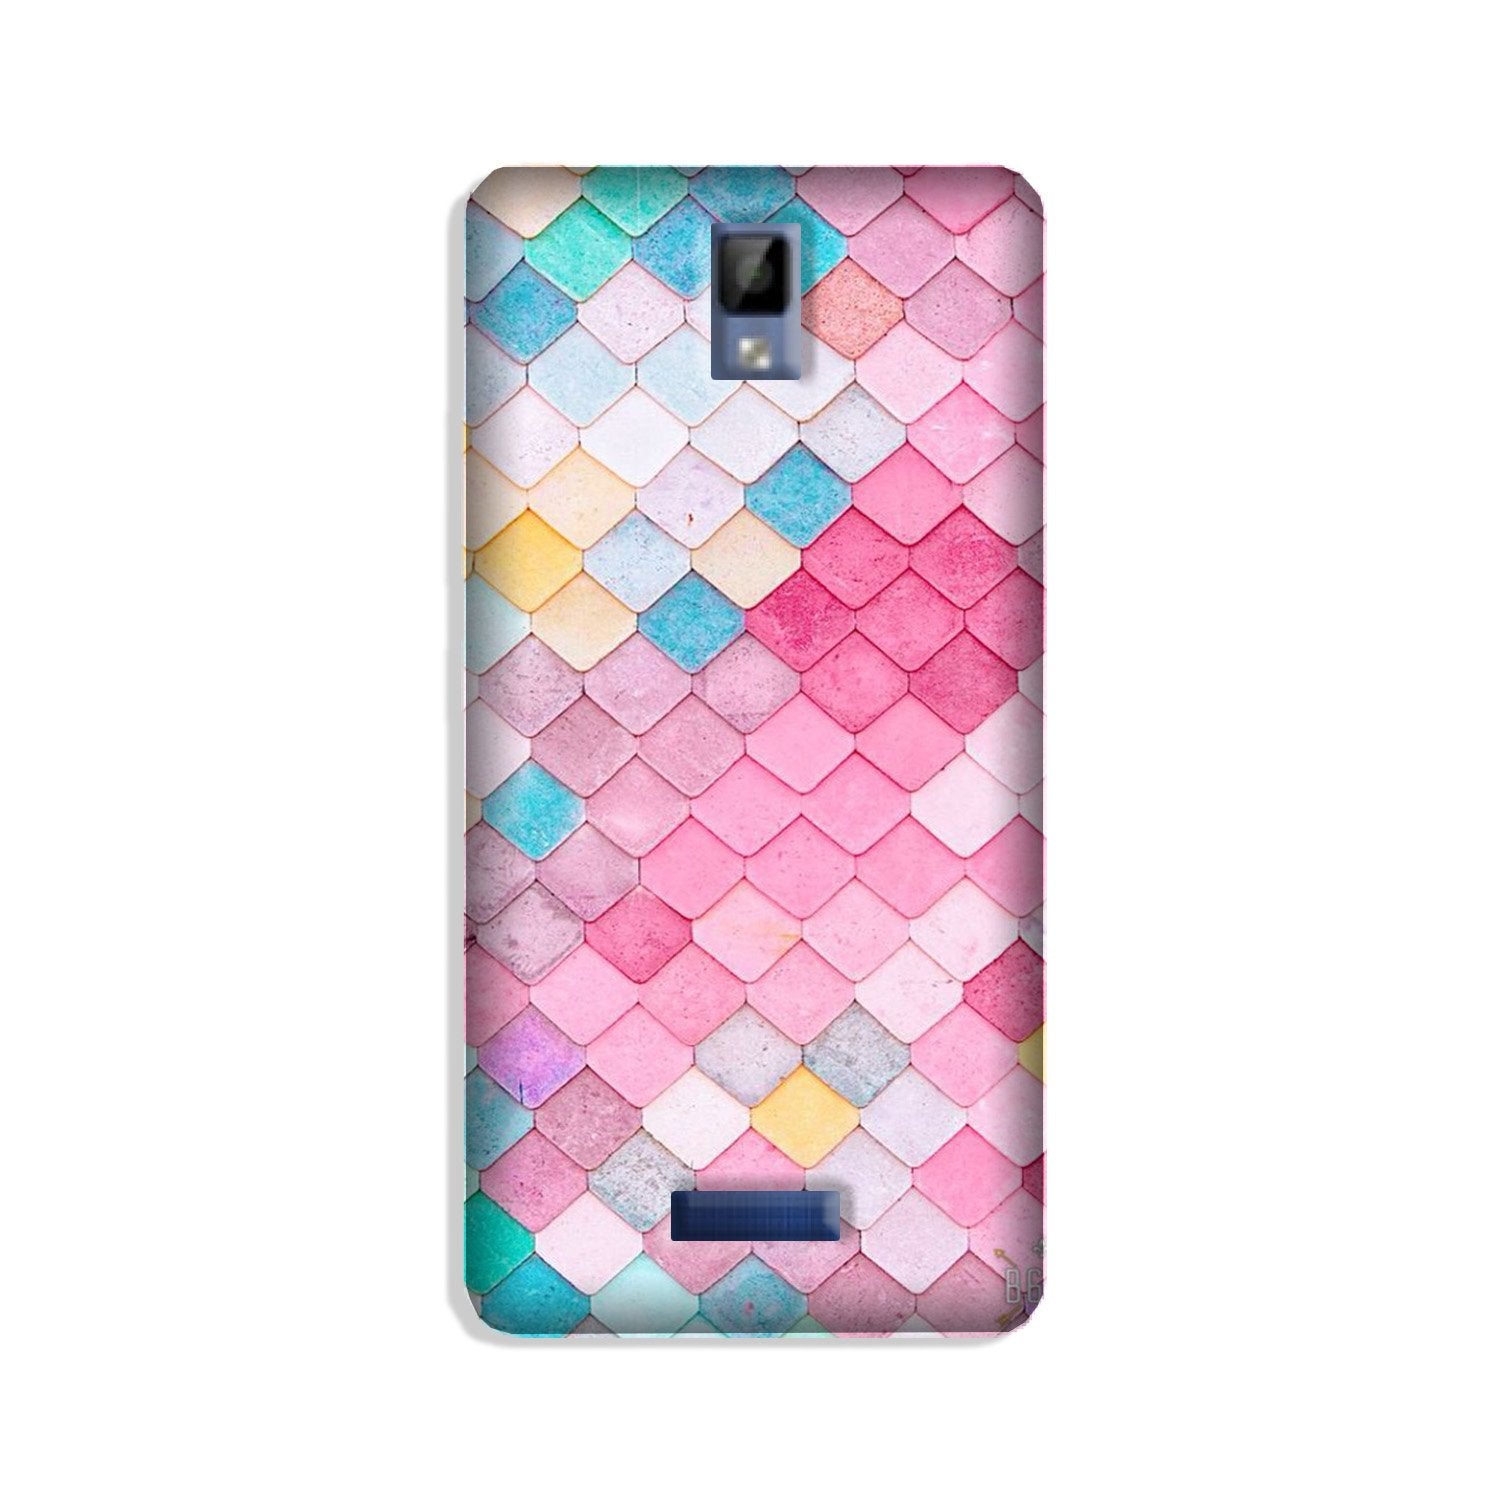 Pink Pattern Case for Gionee P7 (Design No. 215)